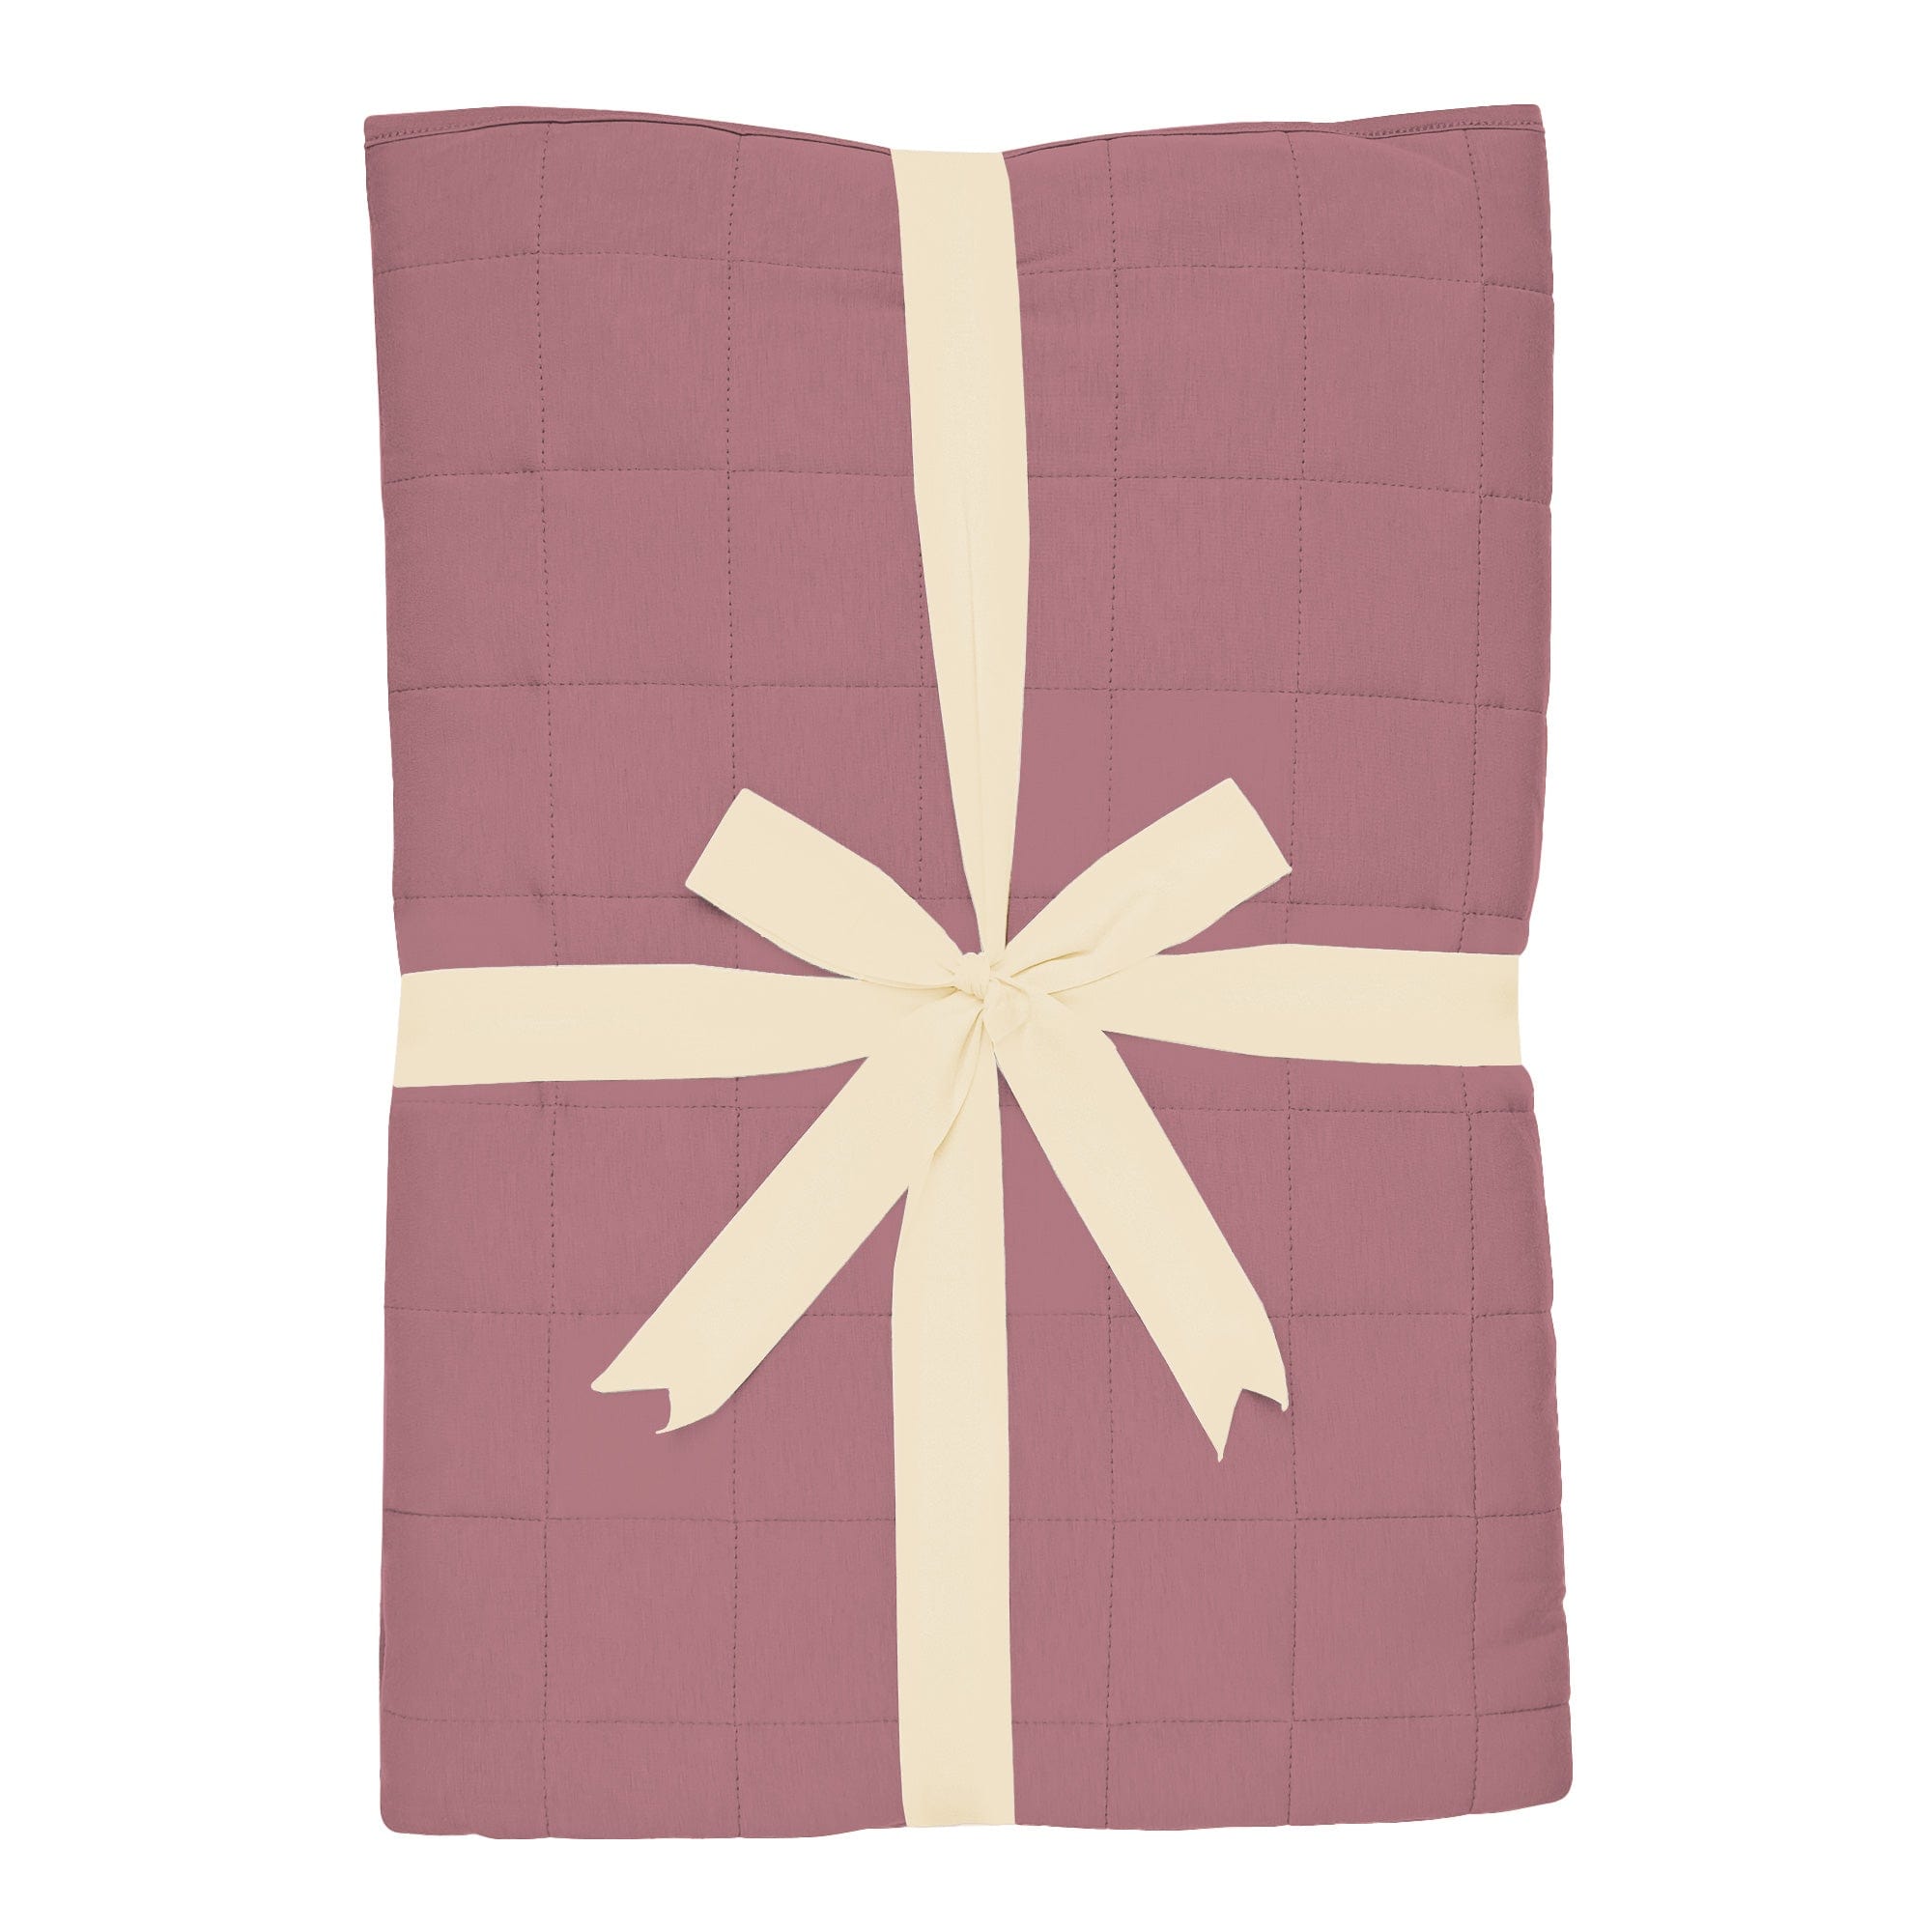 Kyte Baby Youth Blanket Dusty Rose / Youth Youth Blanket in Dusty Rose 2.5